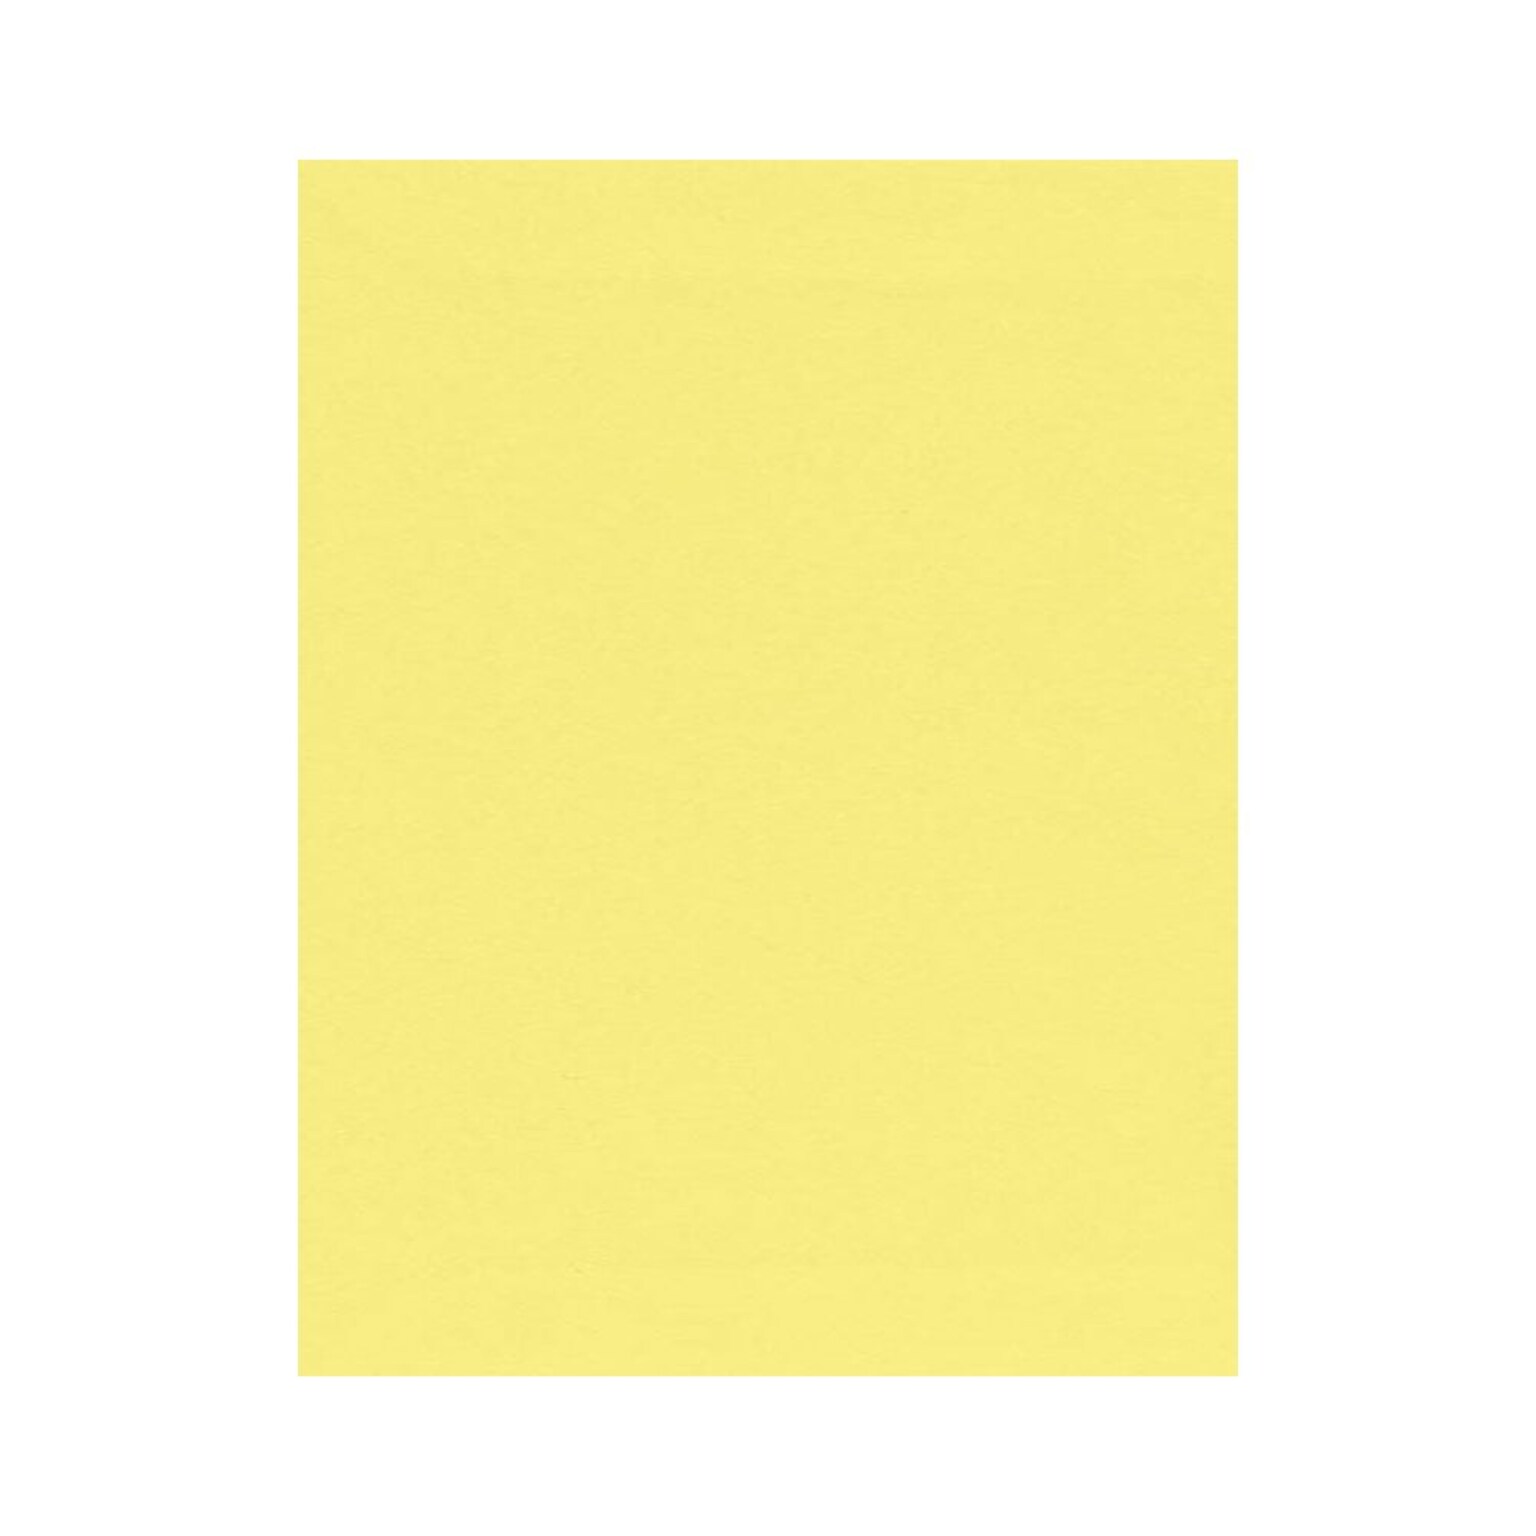 LUX 8.5 x 11 Business Pper, 28 lbs., Pastel Canary Yellow, 50 Sheets/Pack (81211-P-65-50)